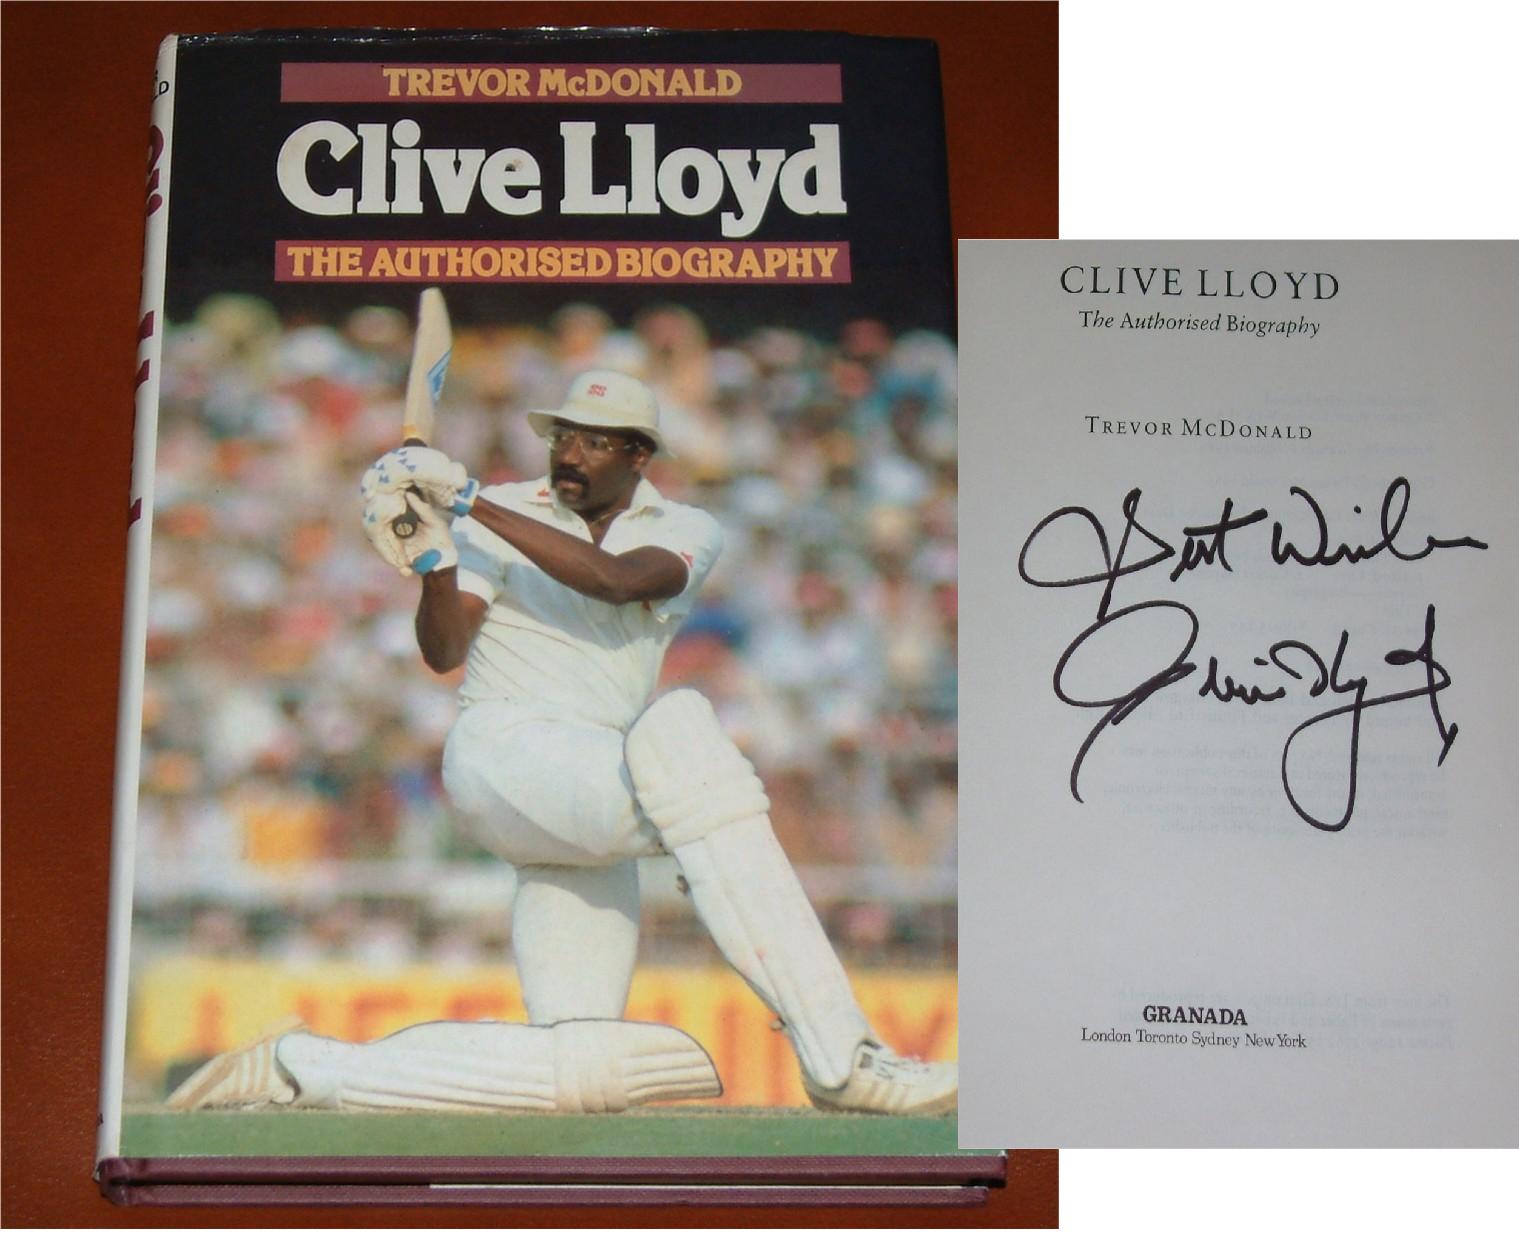 Signed on the inside title page by the former West Indian captain Clive Lloyd. COA - 0410000143